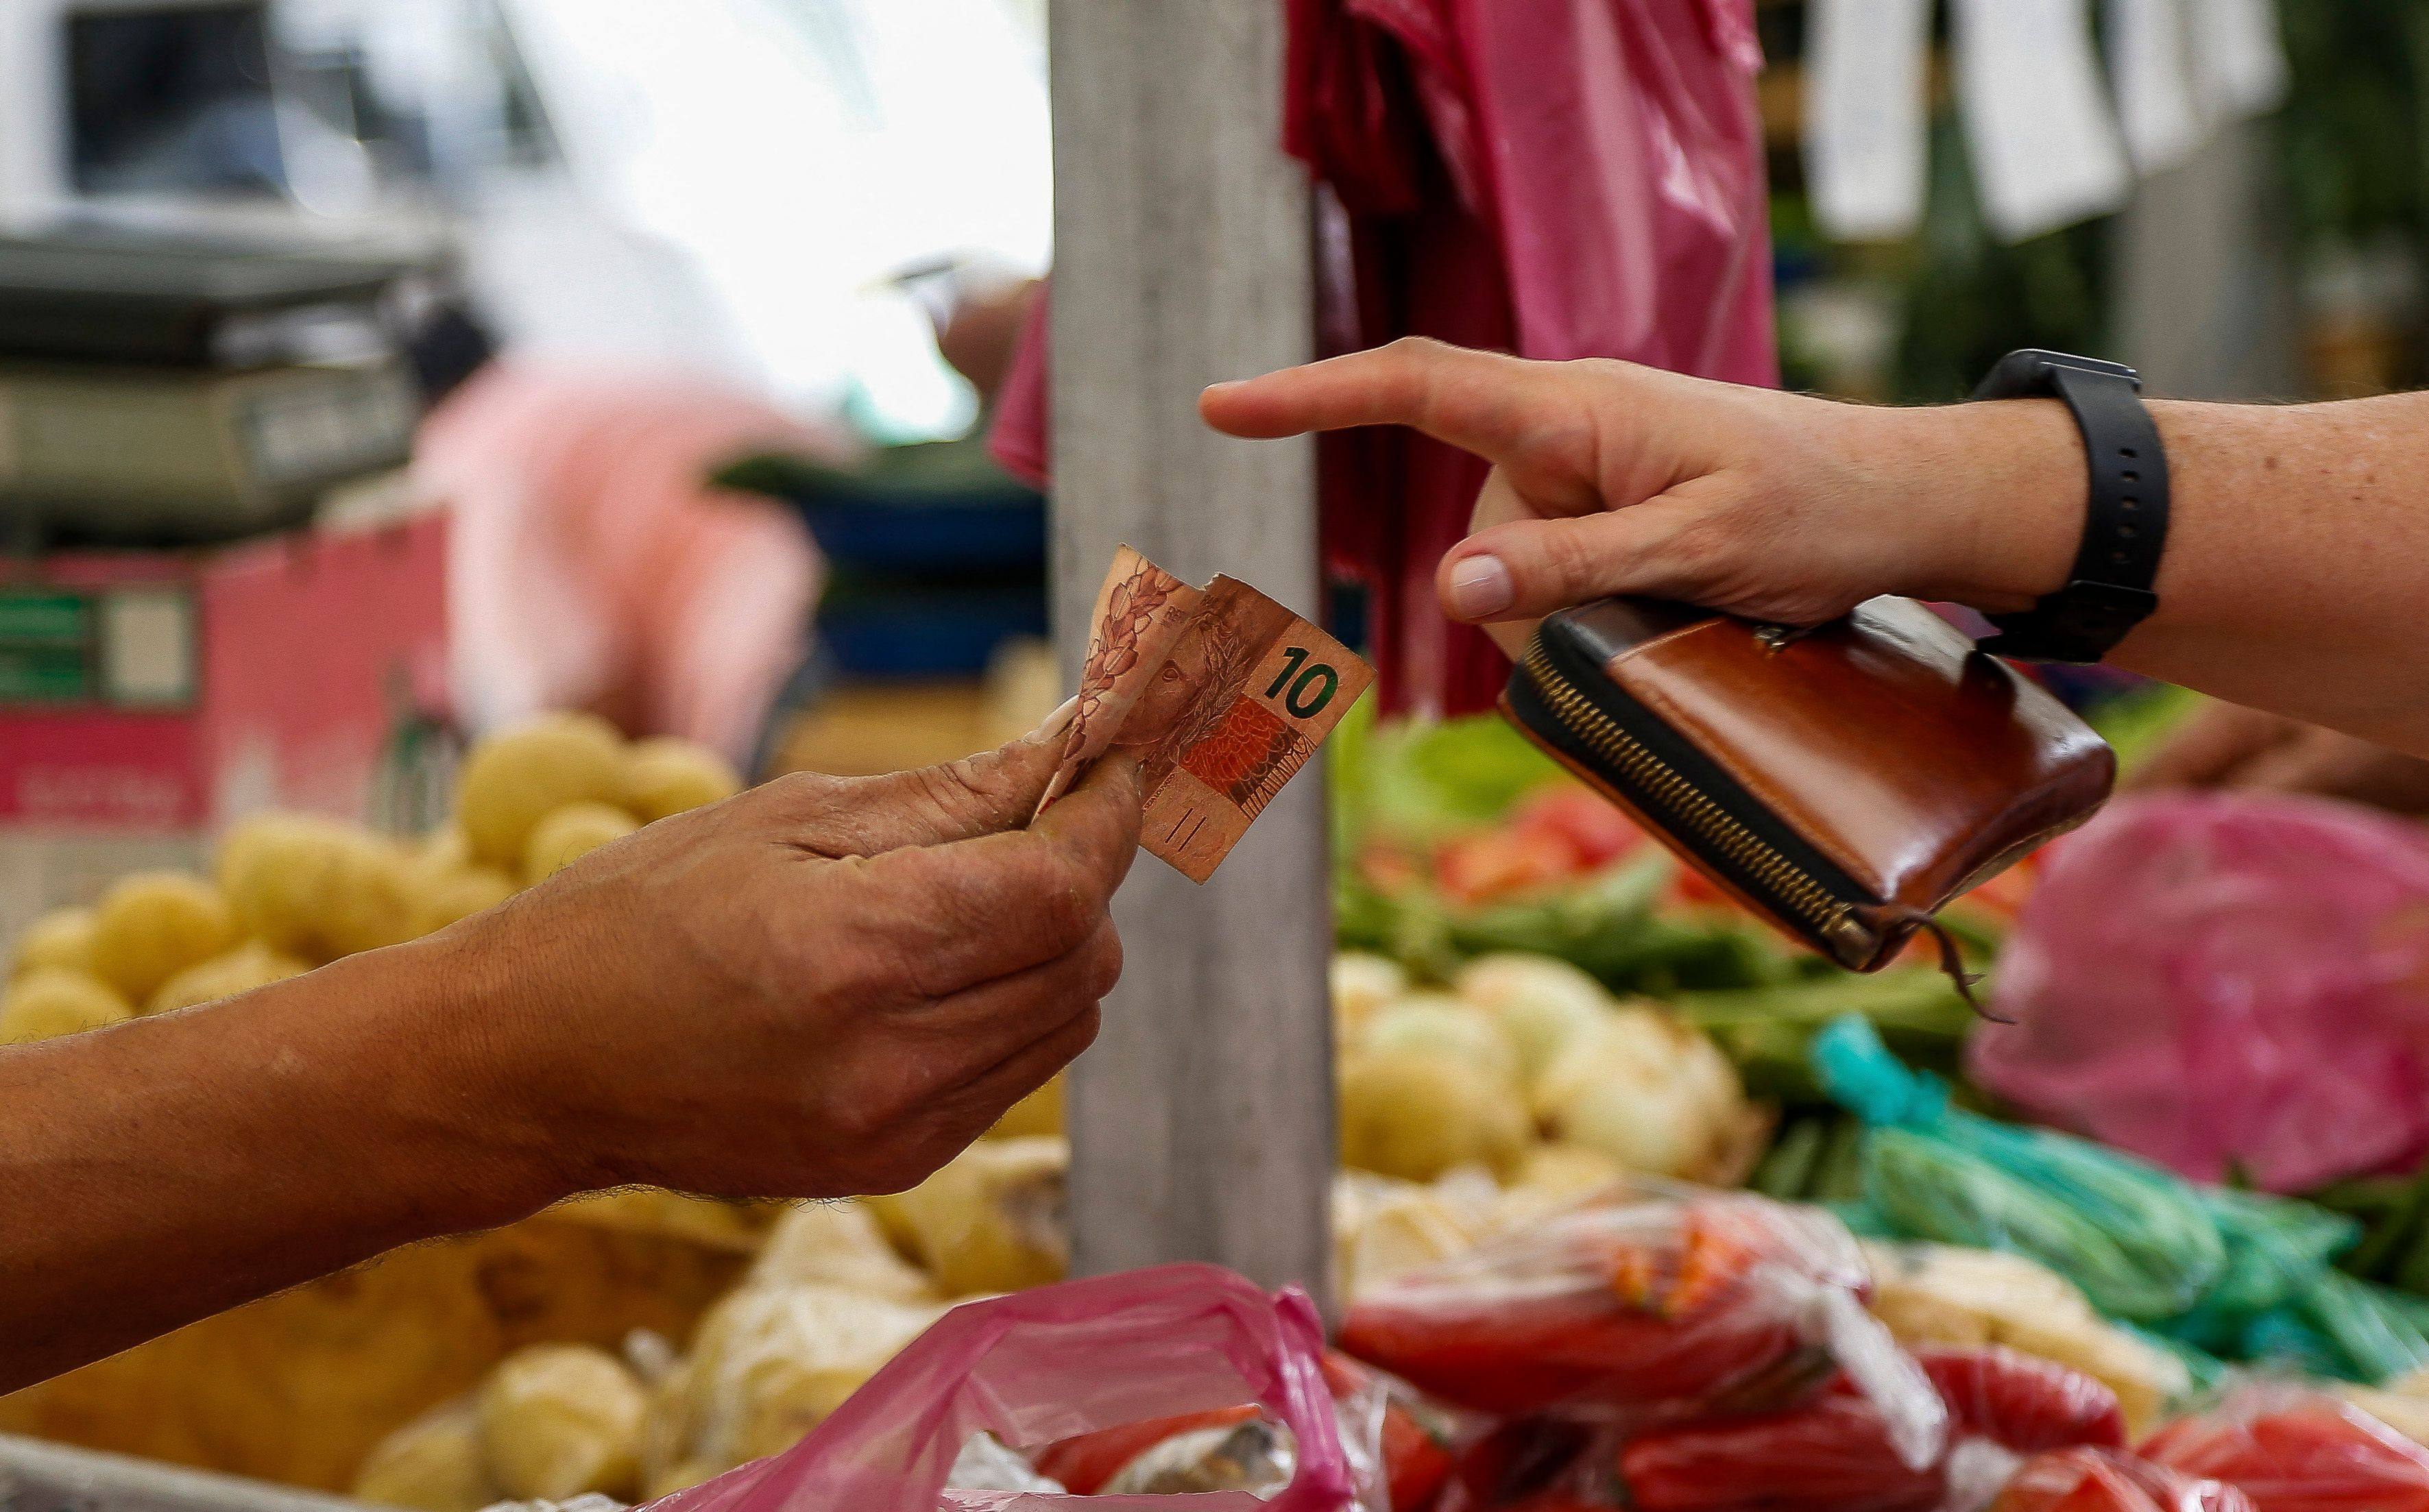 A customer pays in cash at a vegetables stall at a street market in Sao Paulo, Brazil, on August 25. Shocks to the global system resulting from pandemic-induced supply interruptions followed by the Ukraine war could persist for years rather than months. Photo: AFP